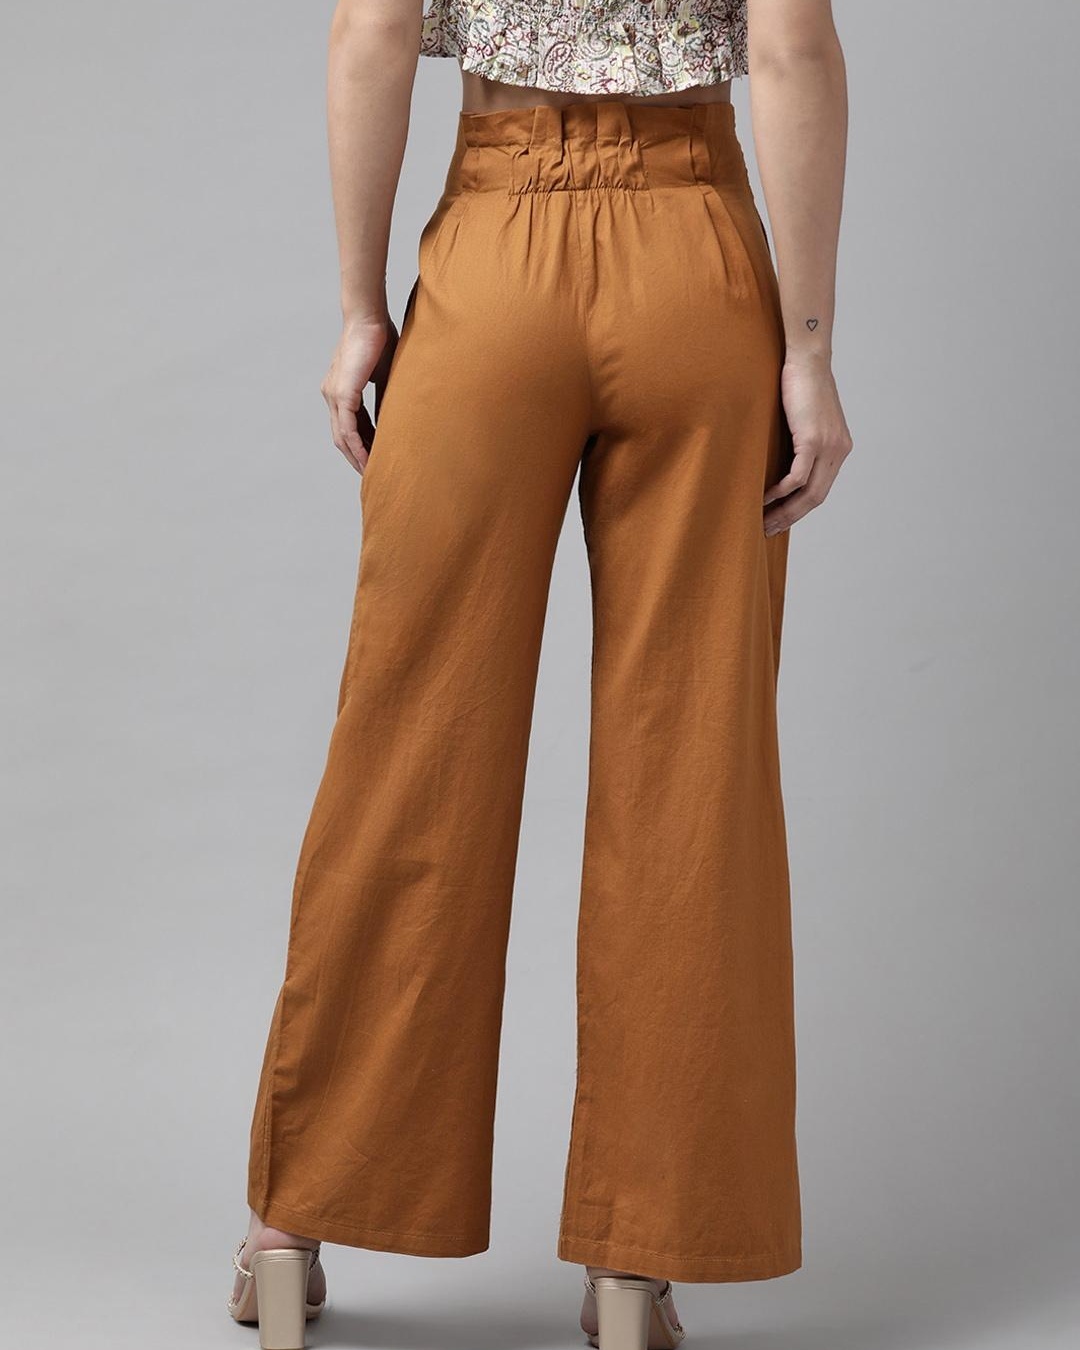 Buy Women's Brown Relaxed Fit Trousers Online at Bewakoof